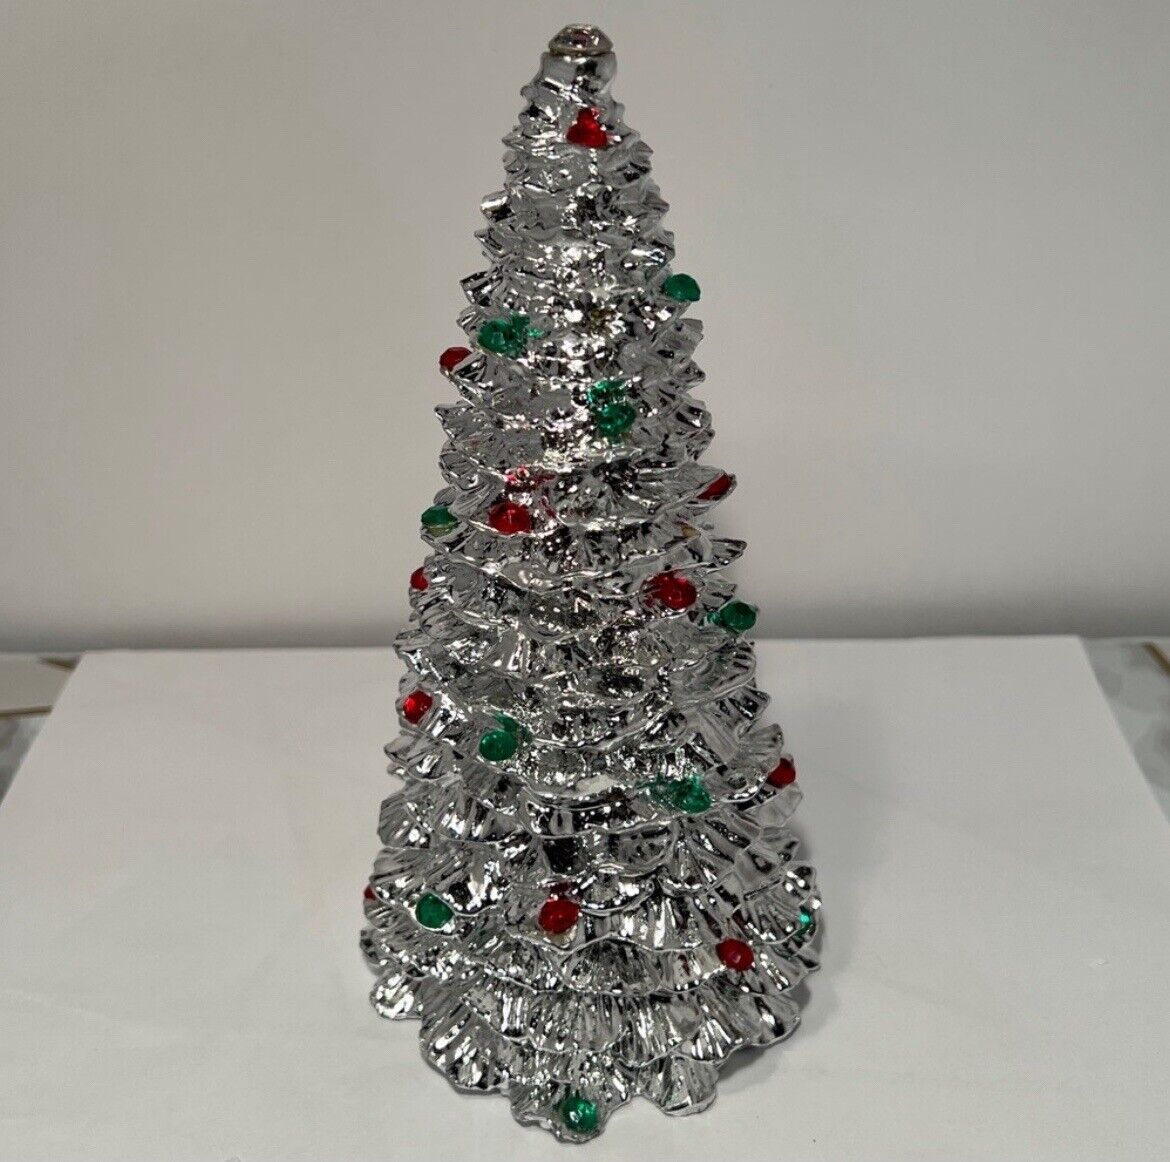 Vintage Decor 8” Heavy Figural Silver Reflective Christmas Tree Red & Green Gems